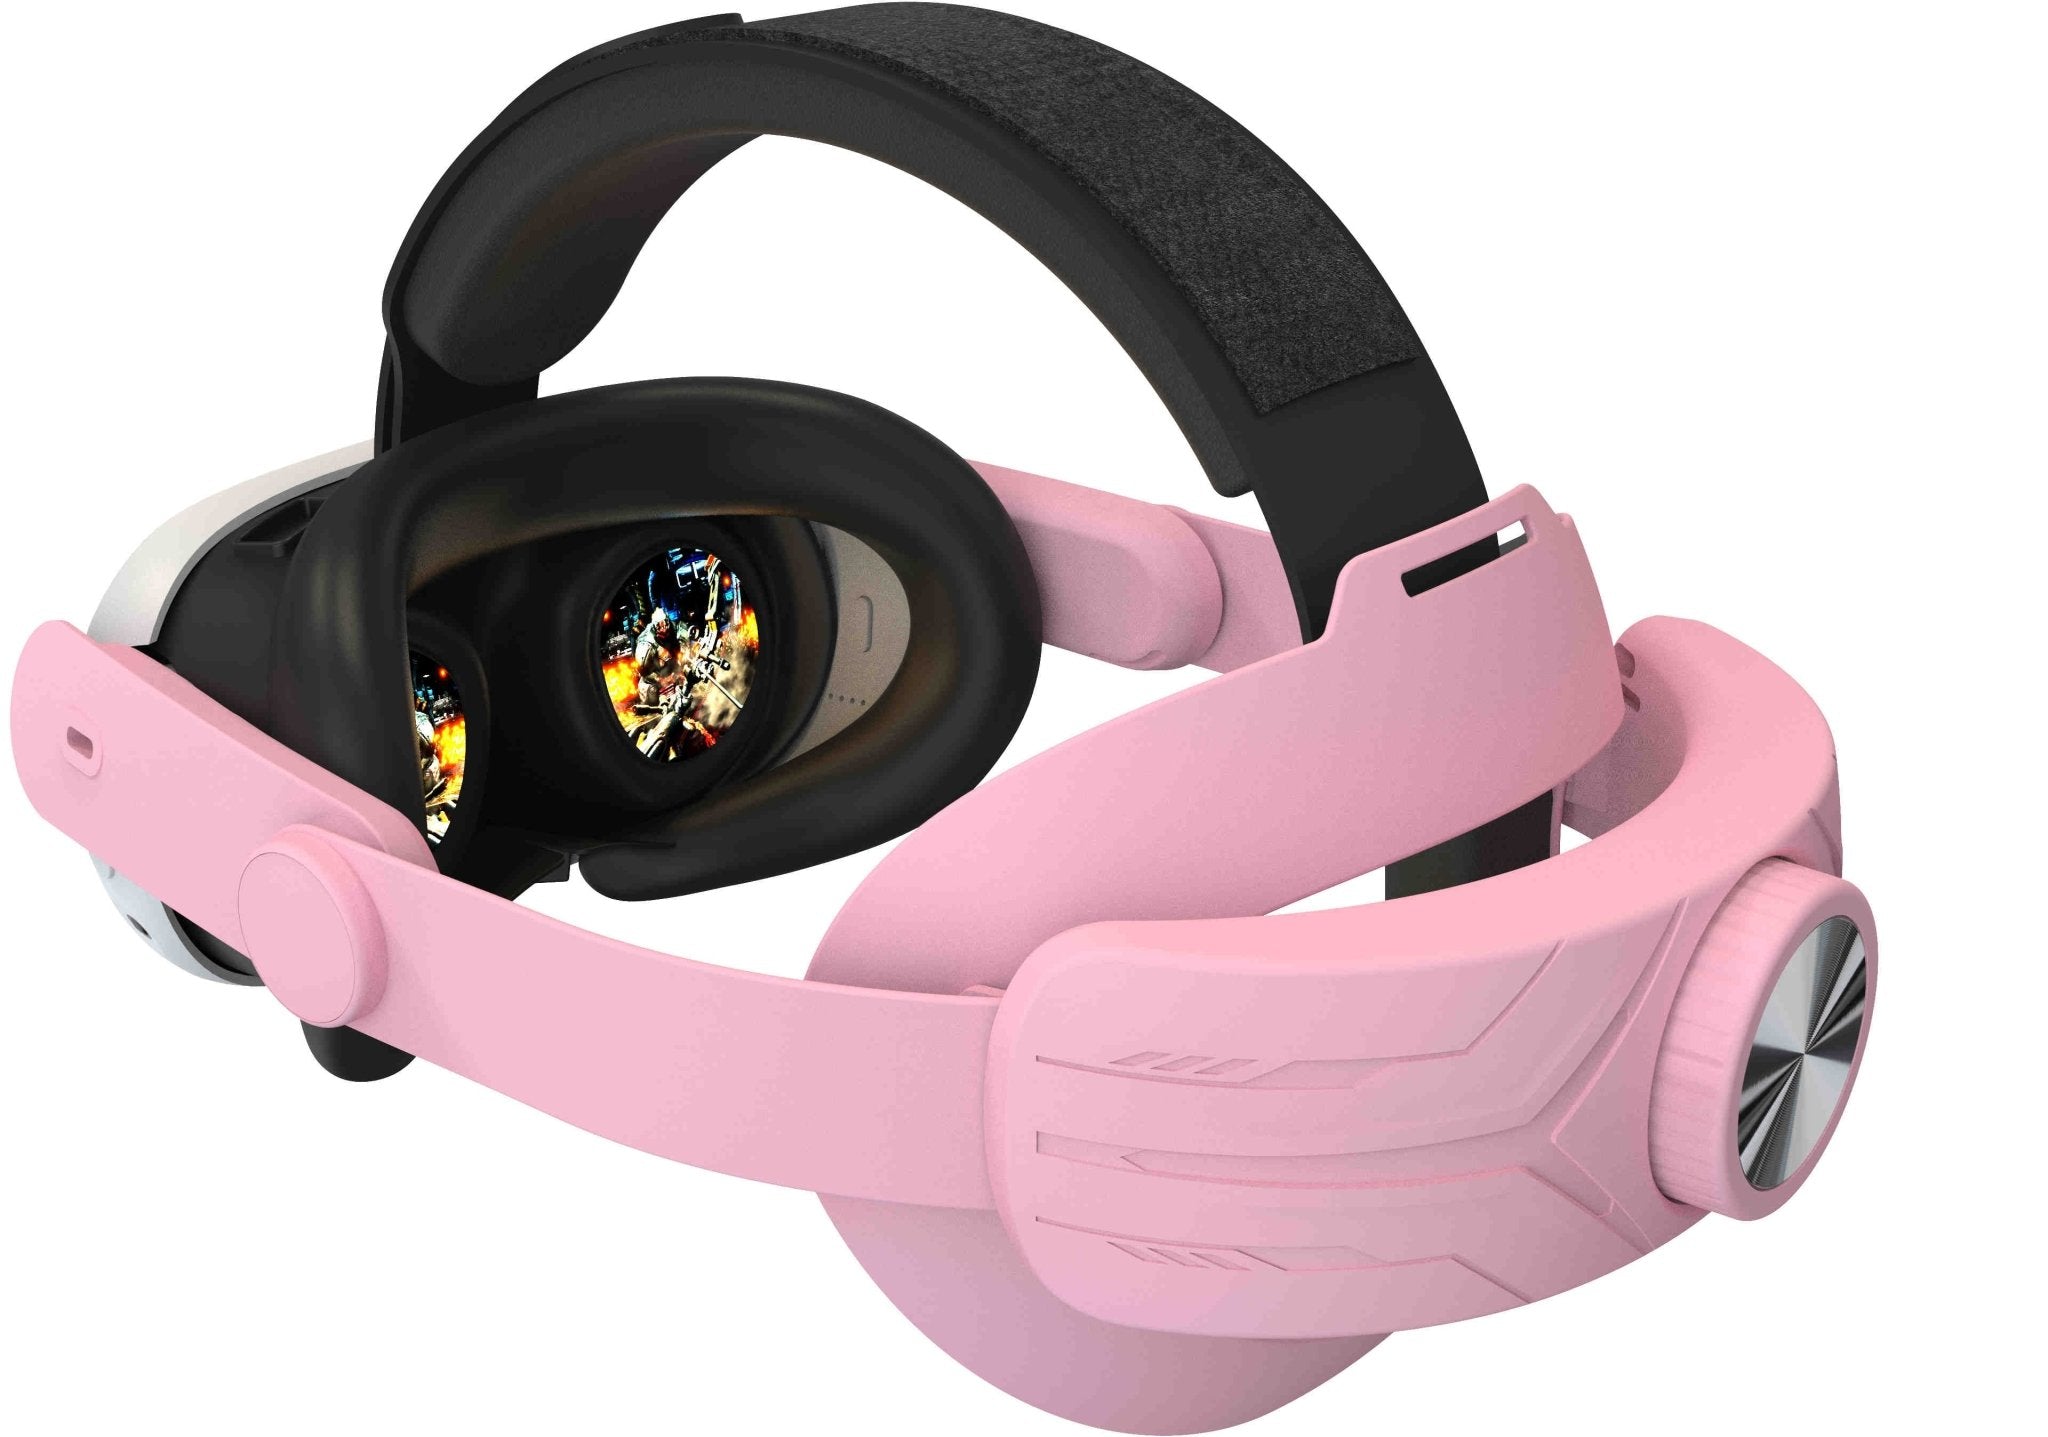 Gamax Meta Quest 3 Head Strap Elite Style - Pink - Level UpGamaxVirtual Reality Accessories6972520255977